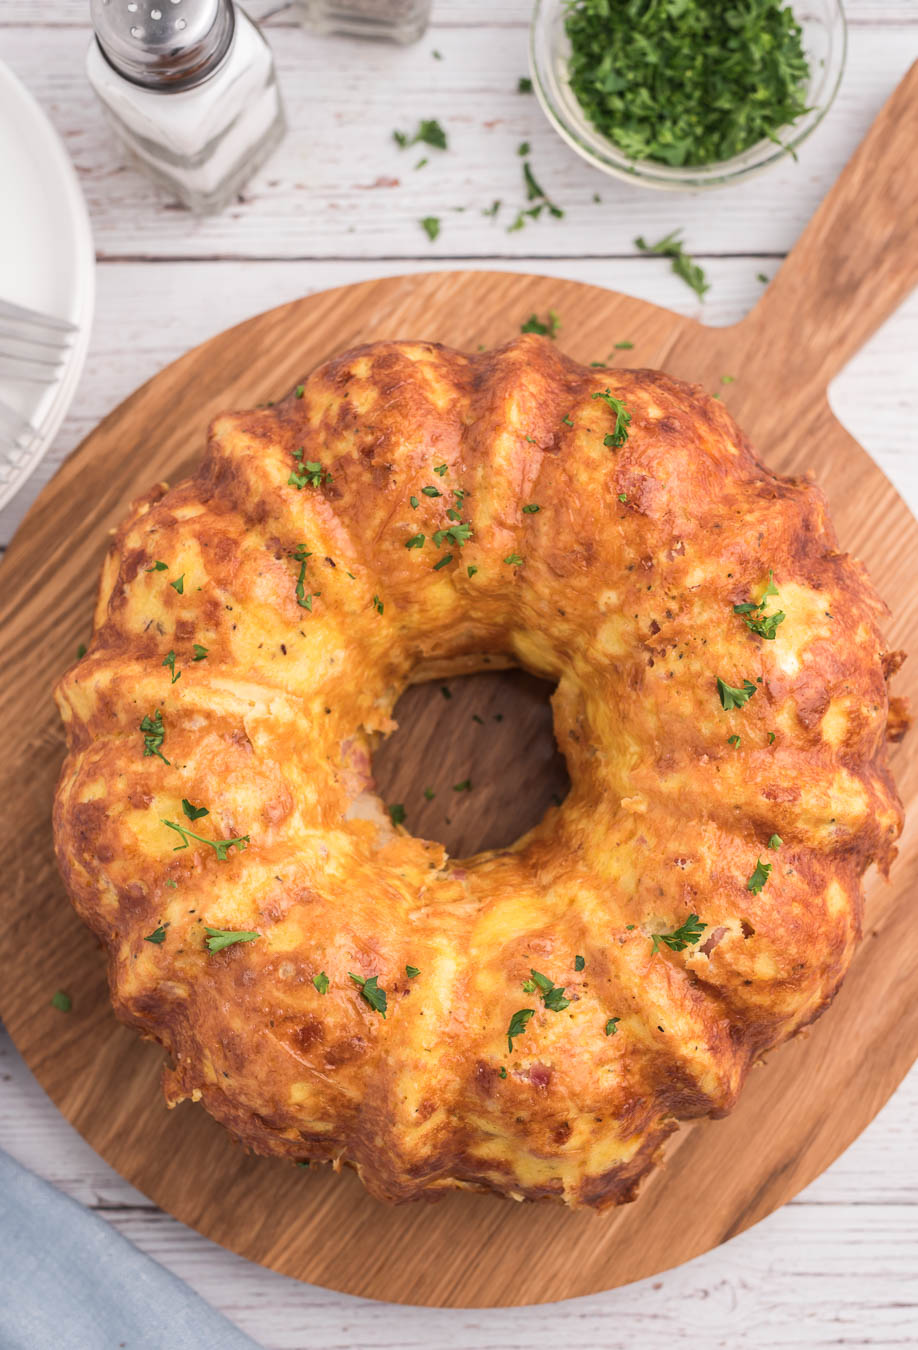 up close view of breakfast casserole shaped by bundt pan and placed on serving board with parsley for garnish. chopped parsley in small dish, salt and pepper shakers on side.